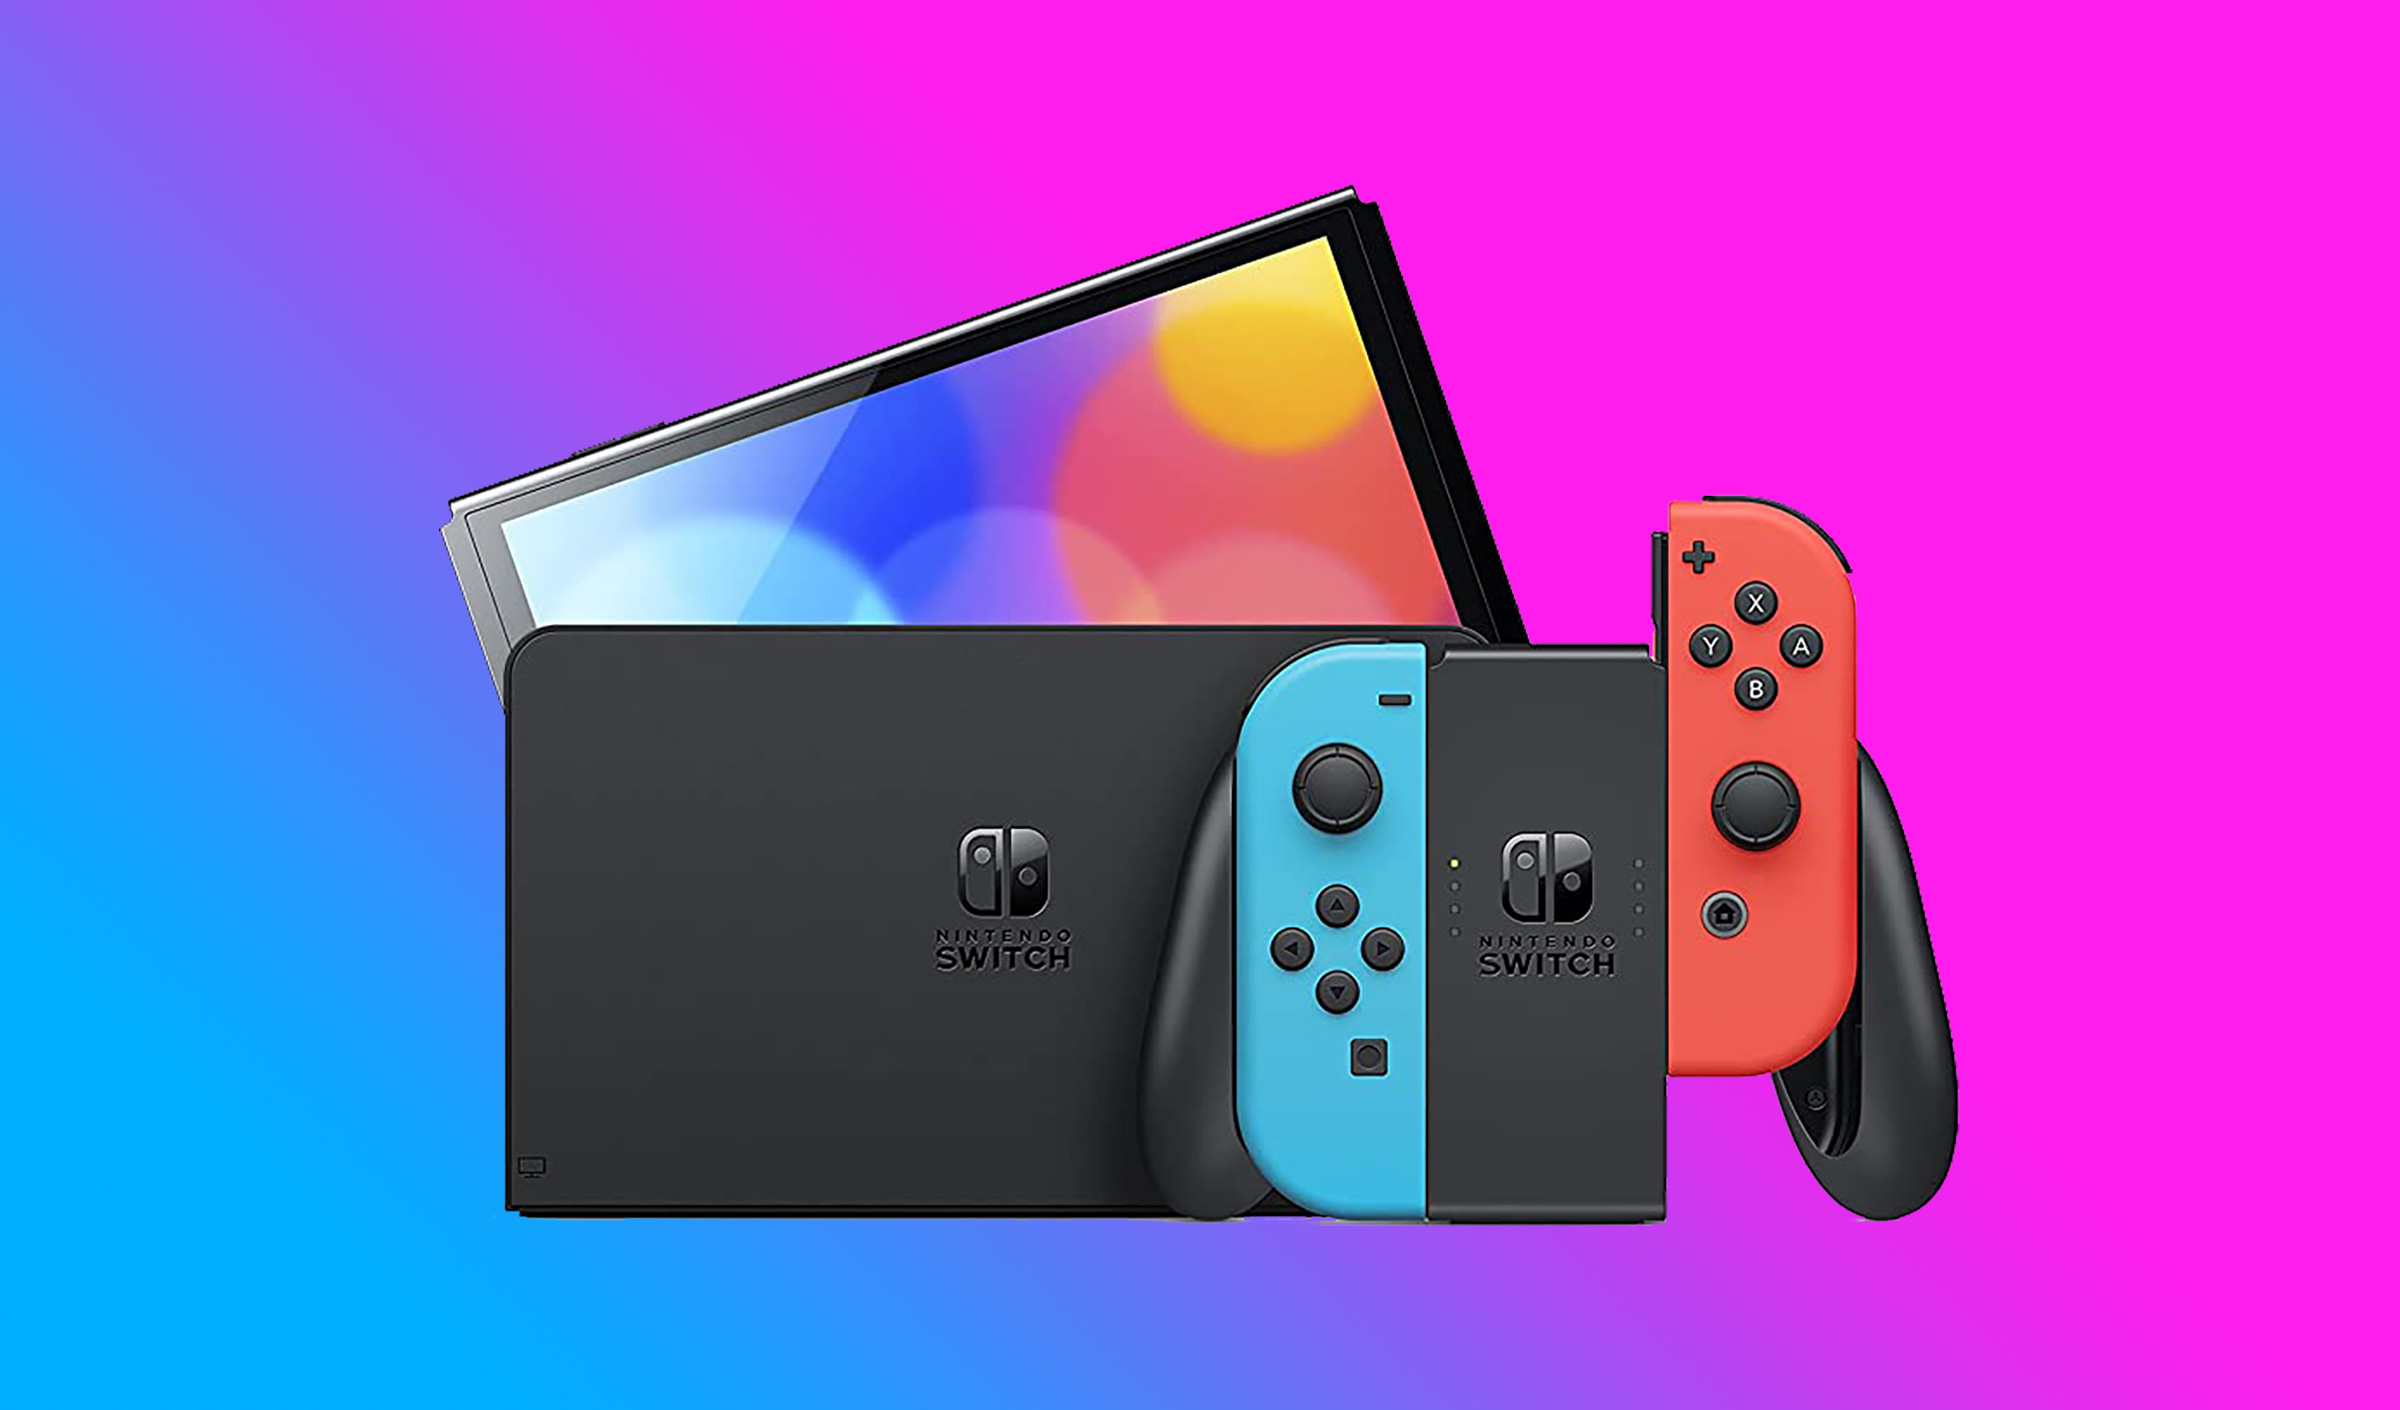 Nintendo Switch 2: $400 and an iteration rather than a revolution